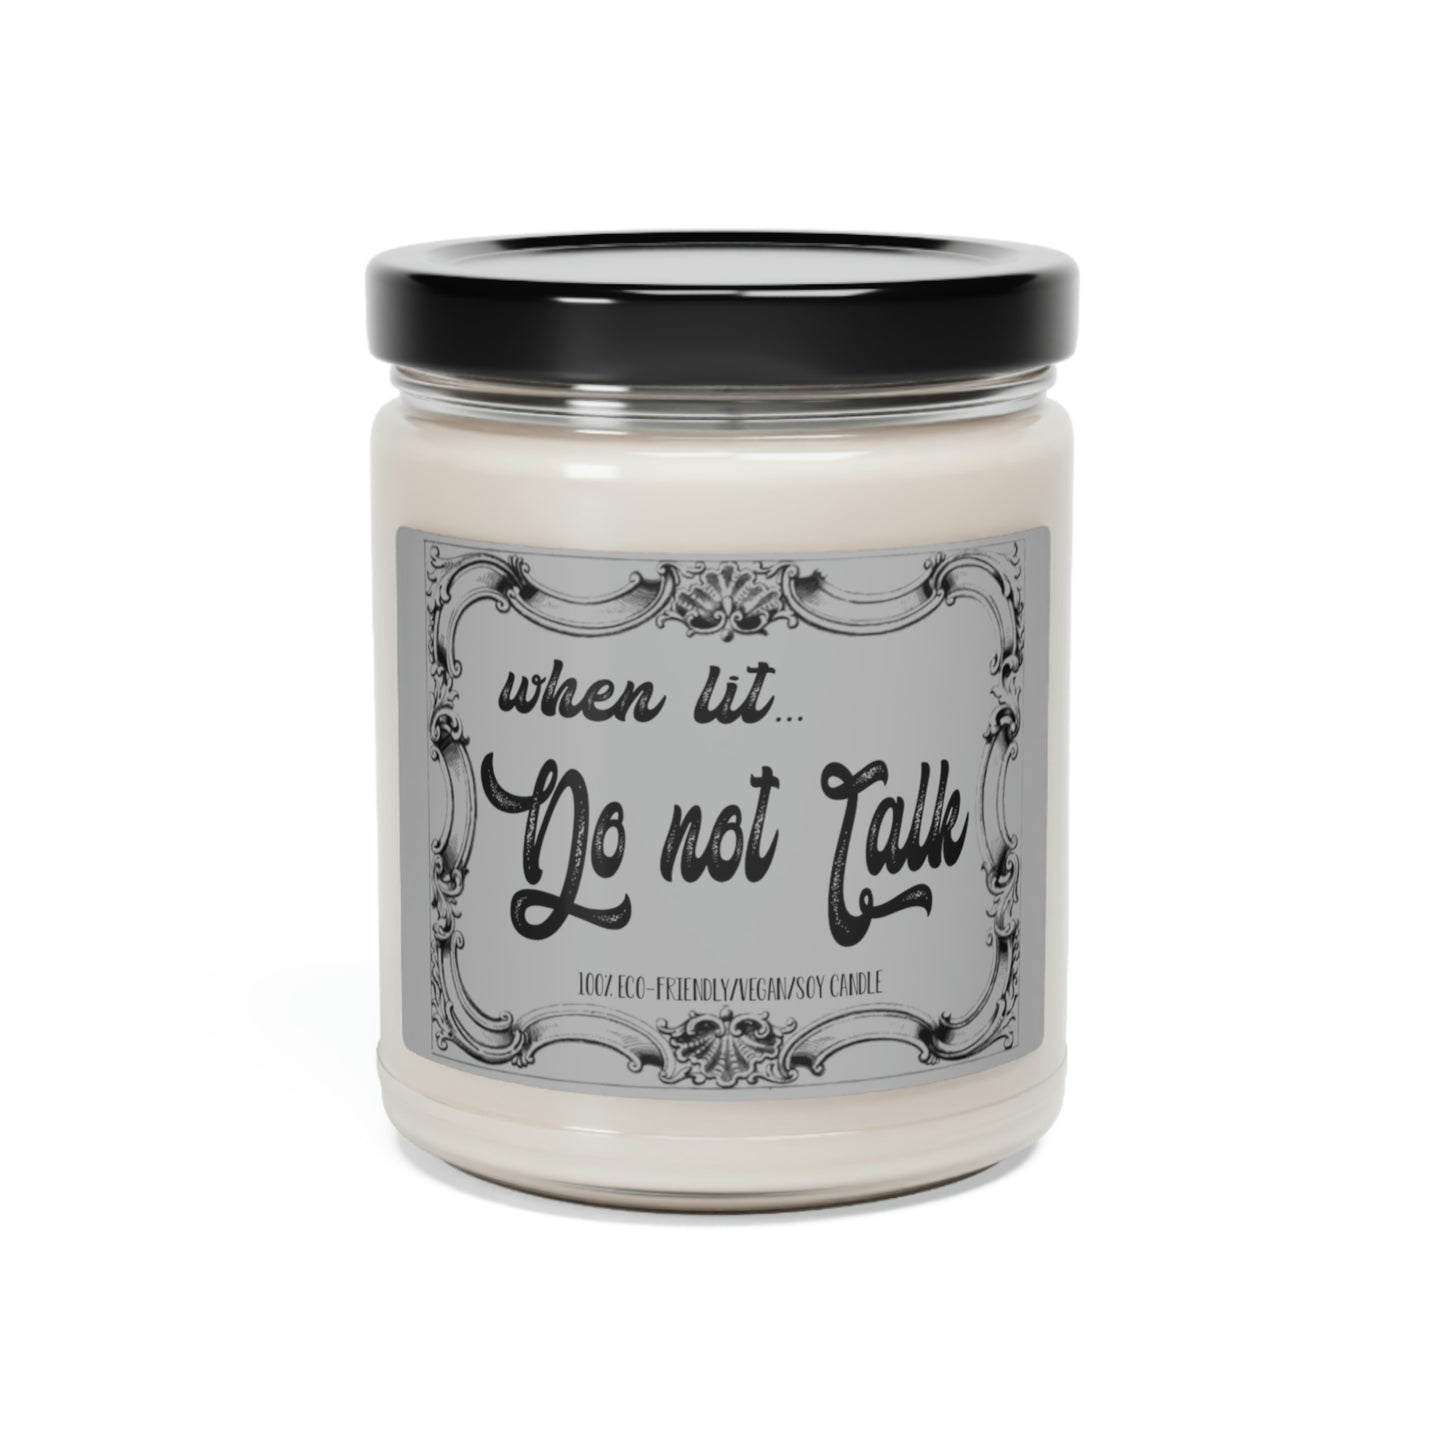 Do not Talk Scented Soy Candle, 9oz